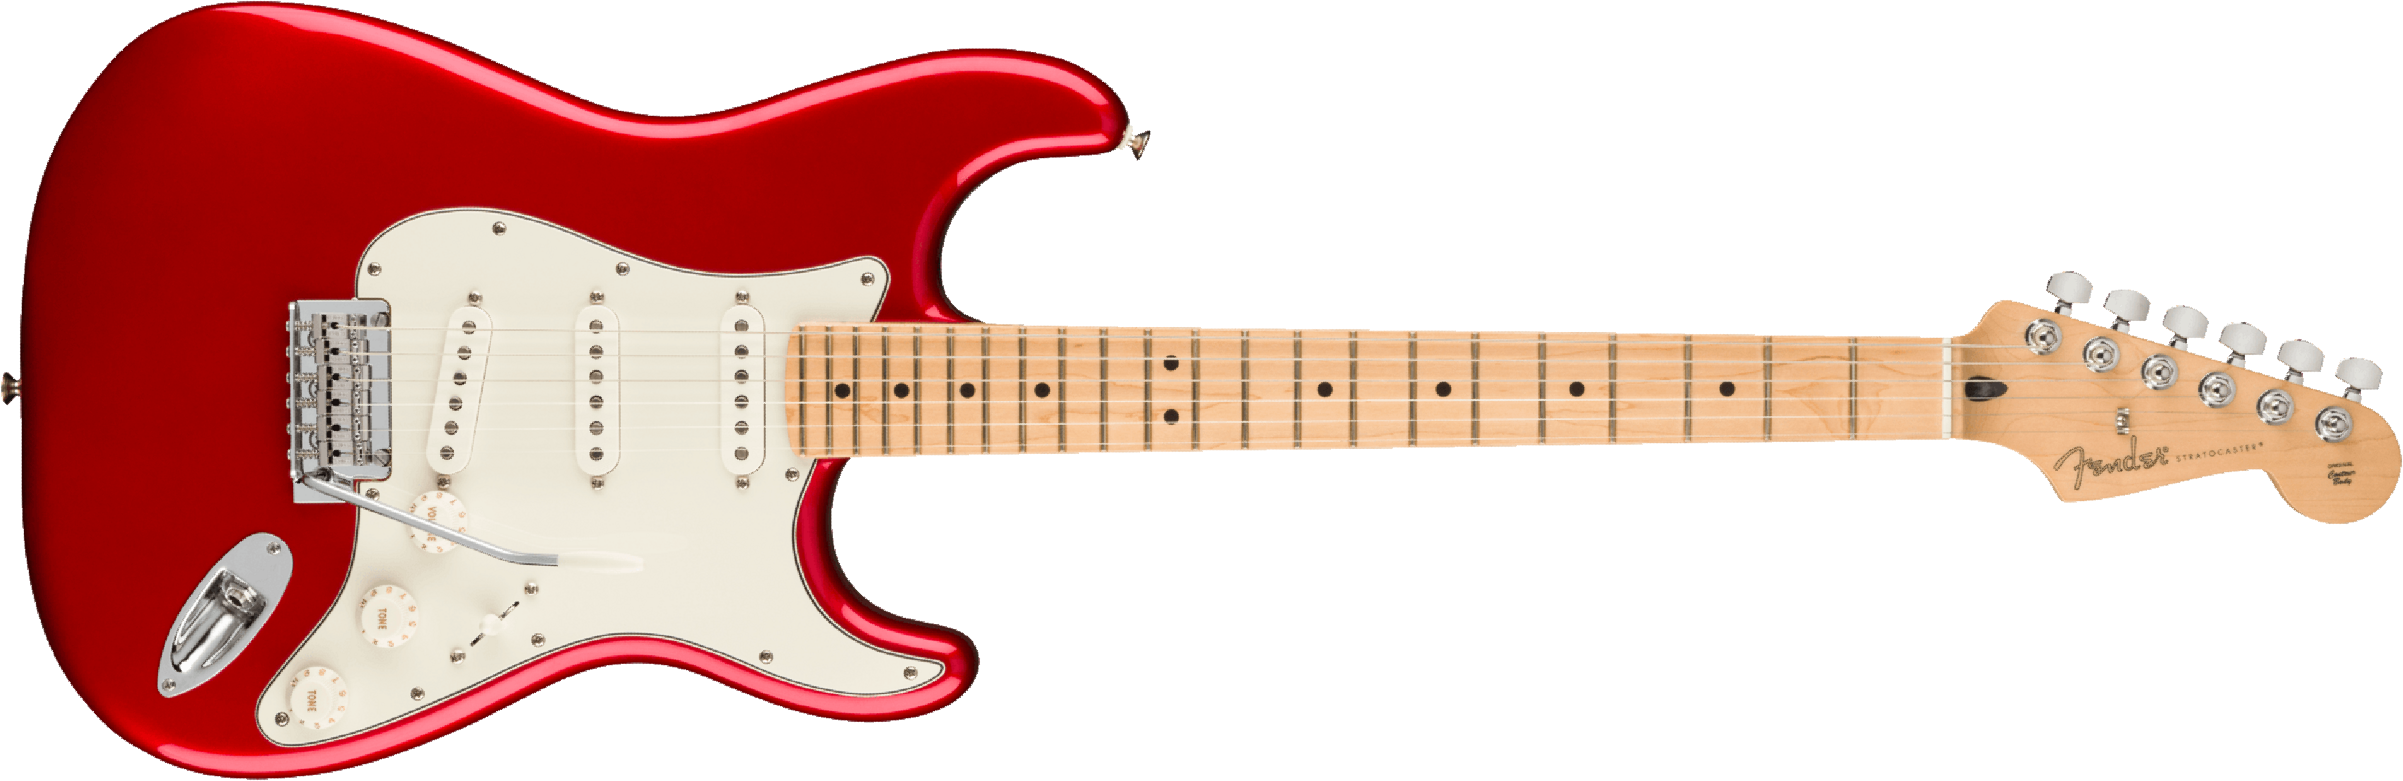 Fender Strat Player Mex 2023 3s Trem Mn - Candy Apple Red - Str shape electric guitar - Main picture